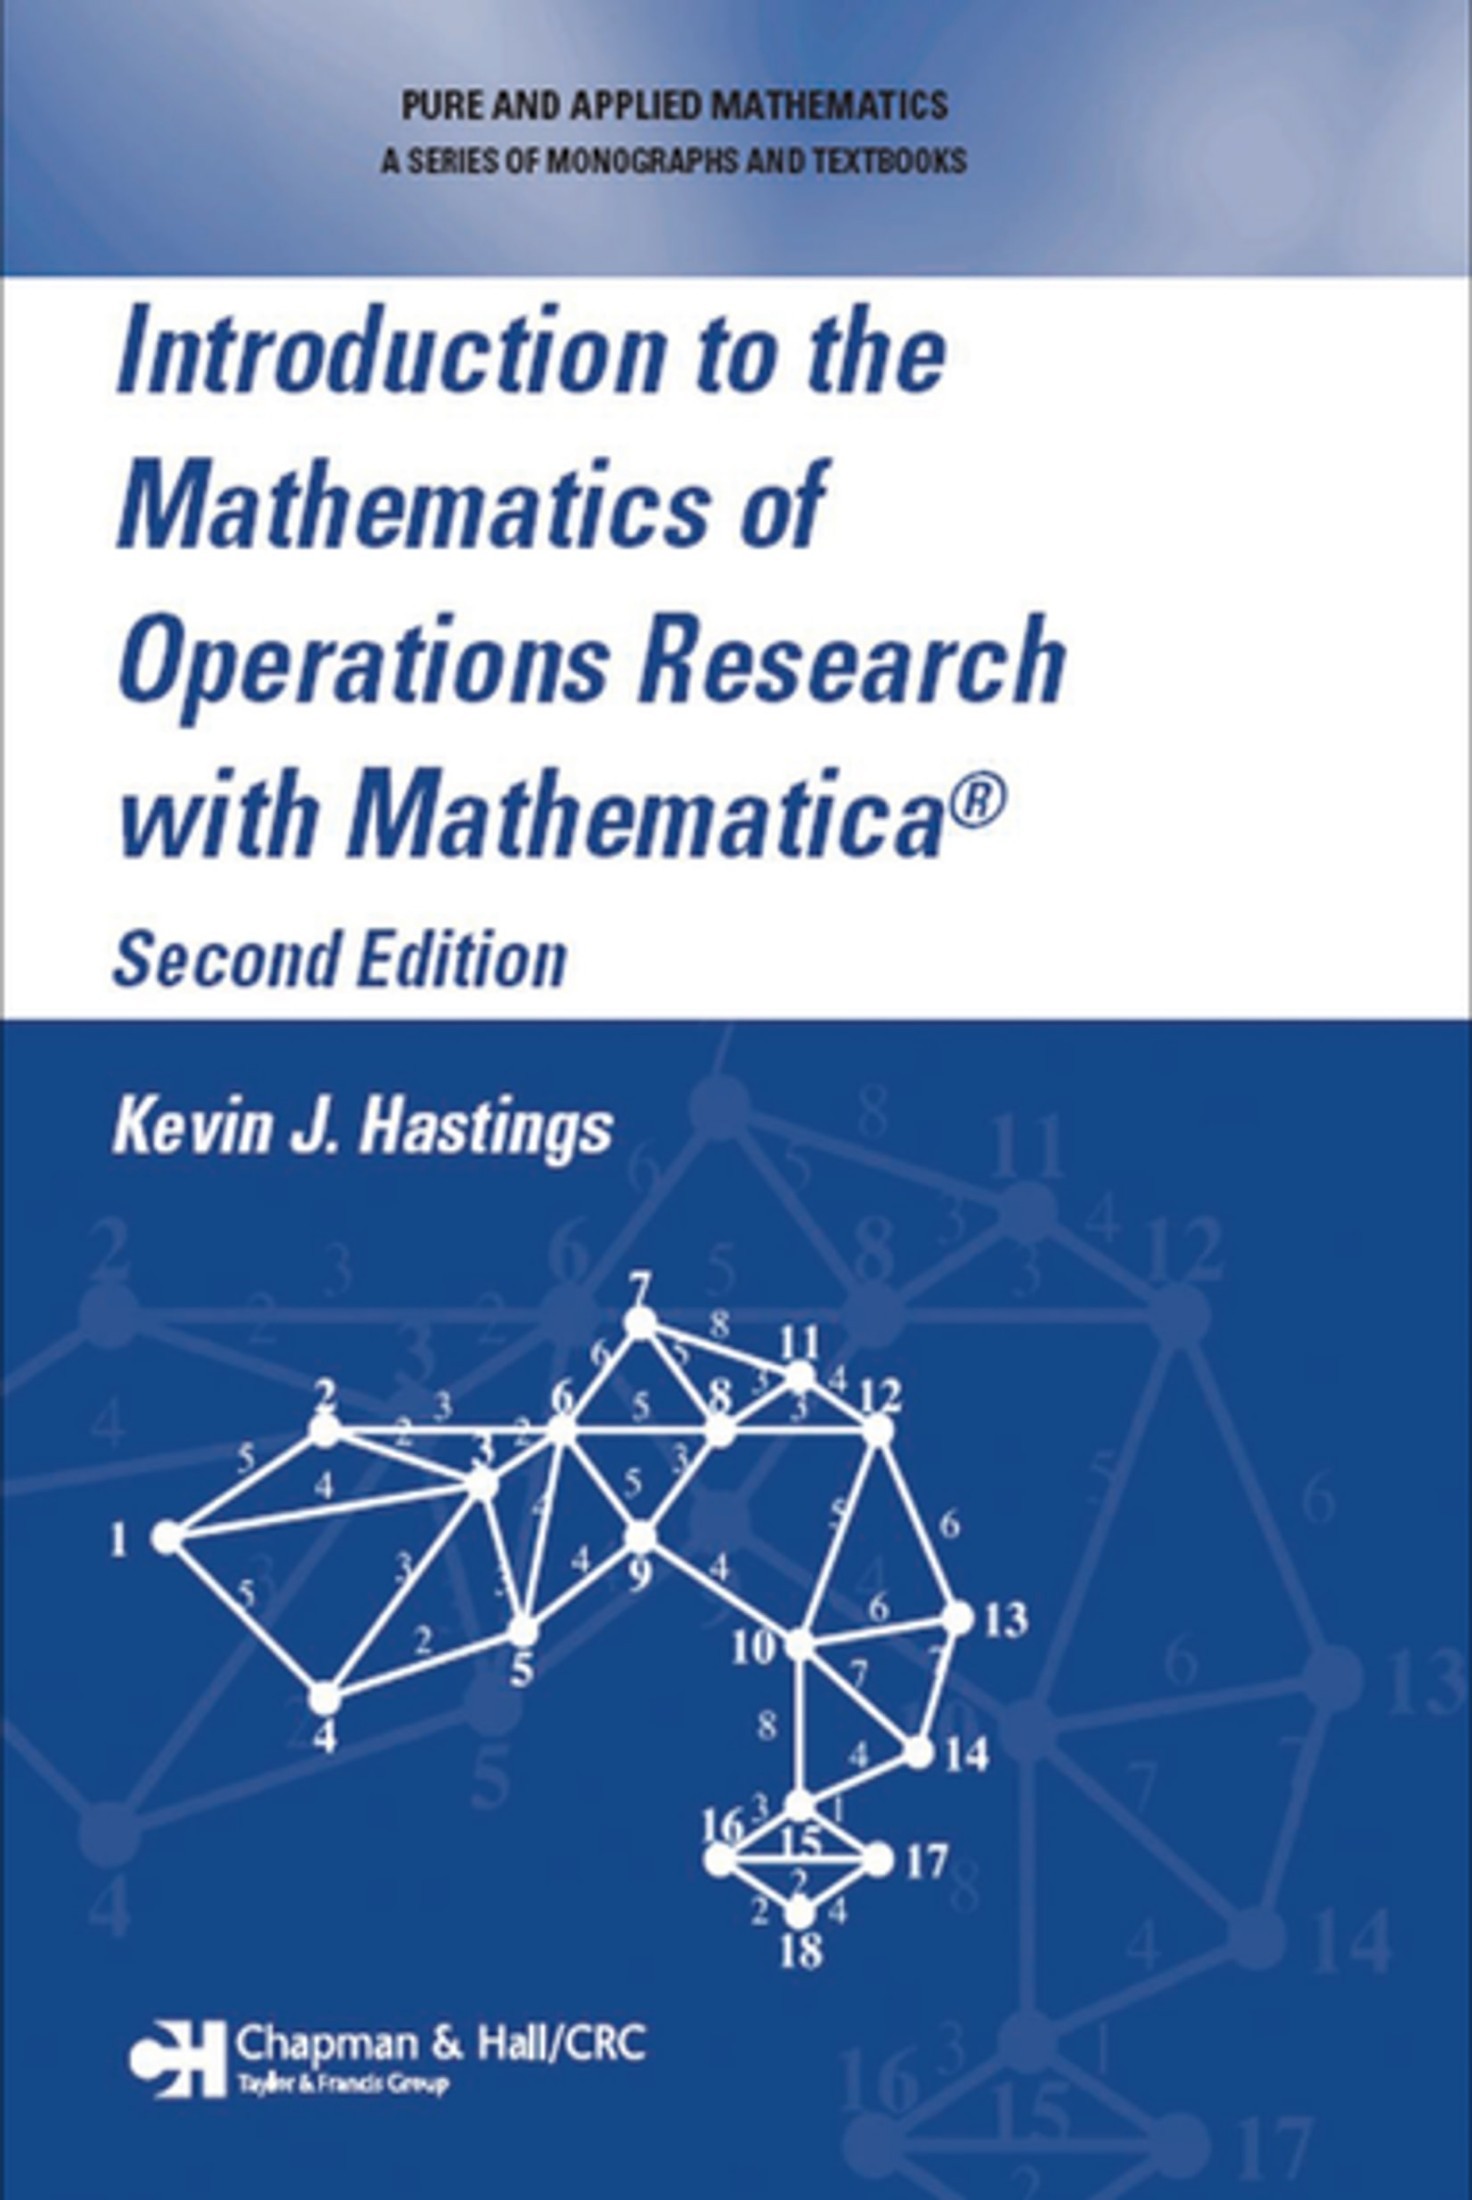 Introduction to the Mathematics of Operations Research with Mathematica®, Second Edition